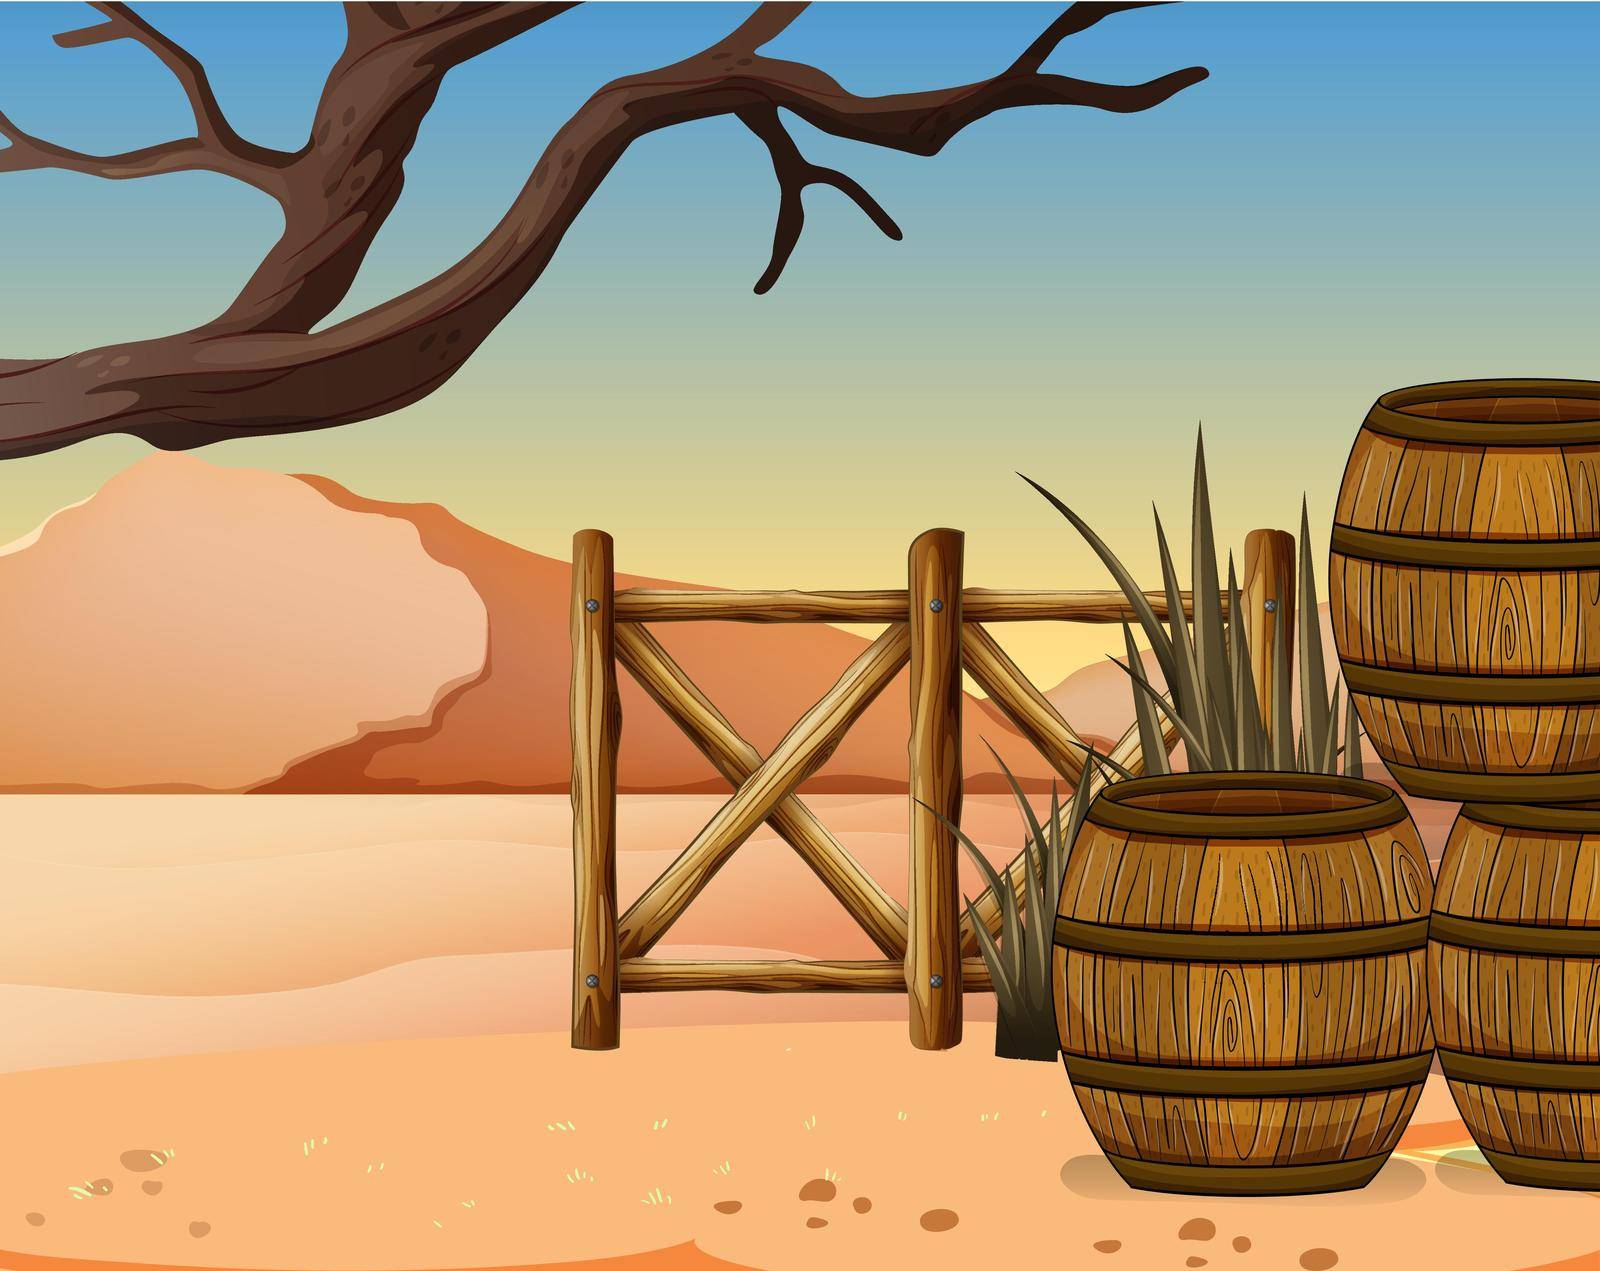 View of the desert with wooden barrels